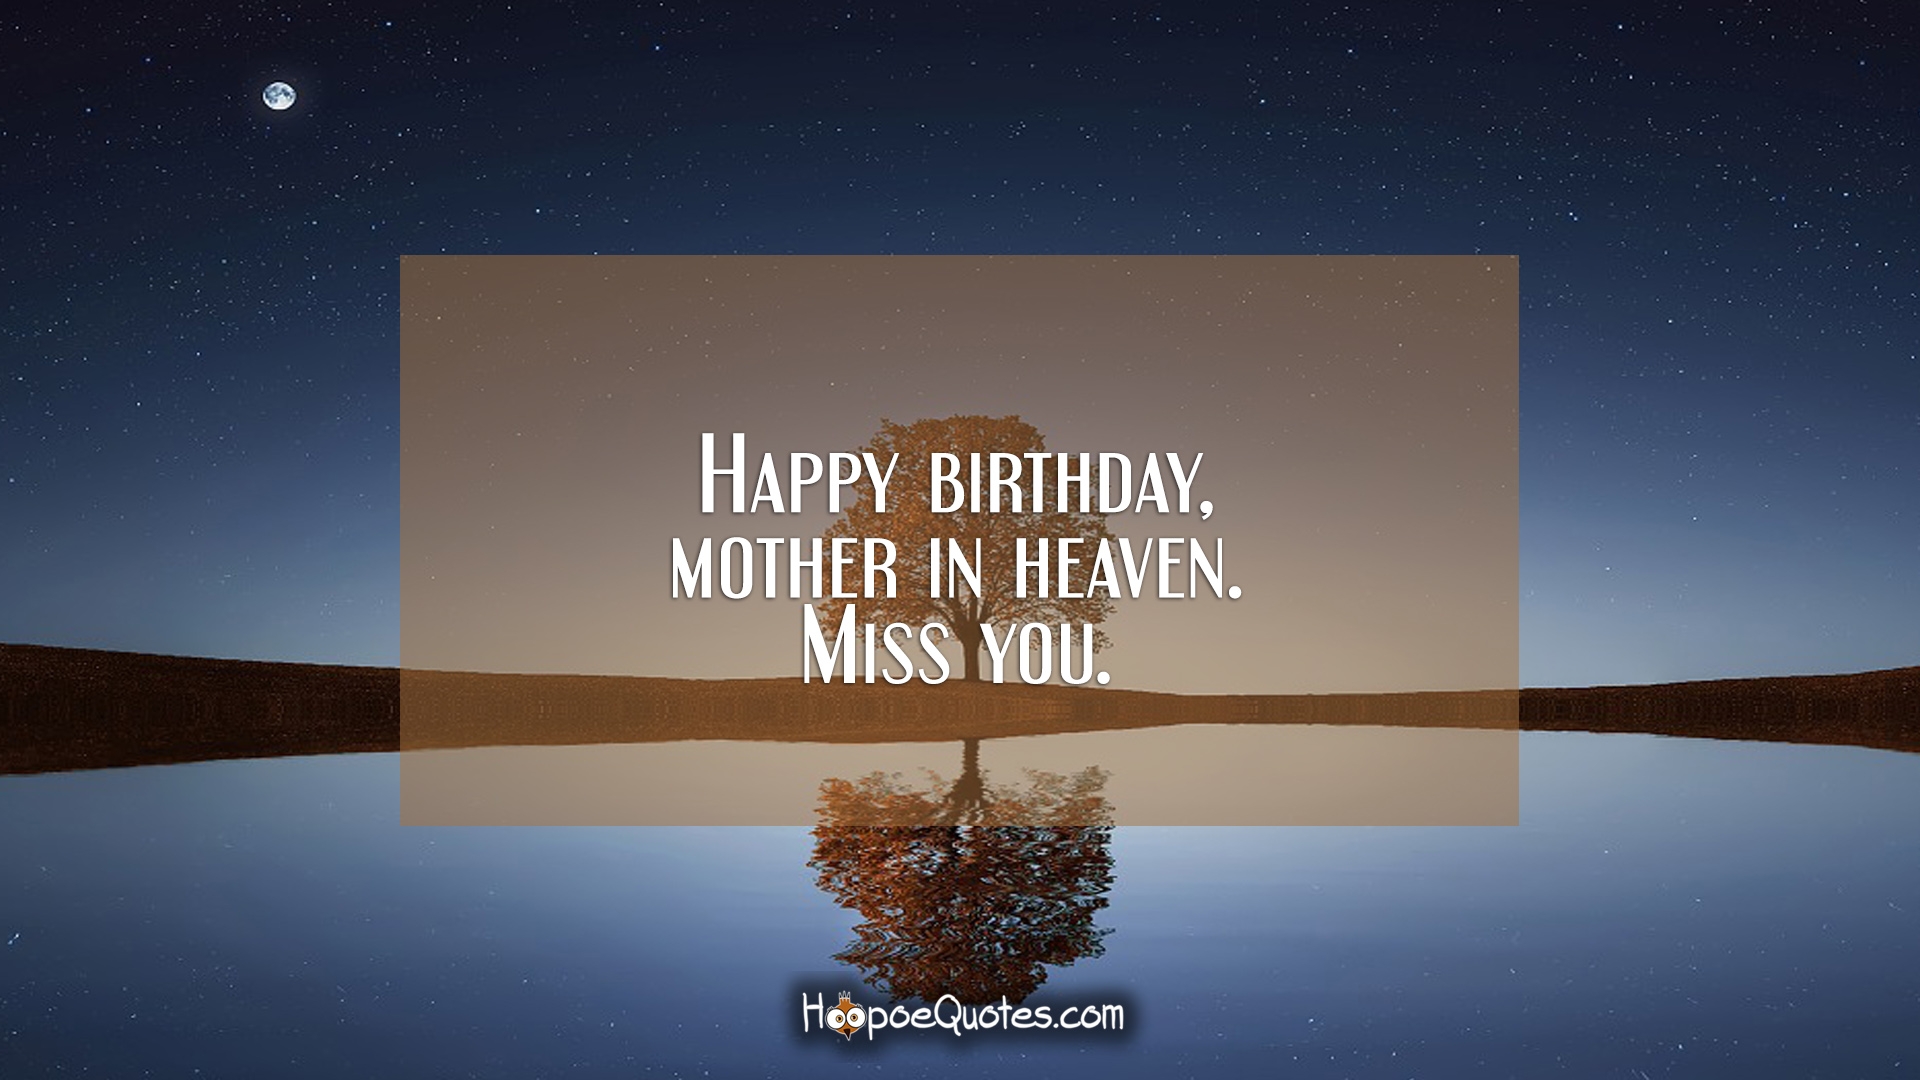 Happy birthday, mother in heaven. Miss you